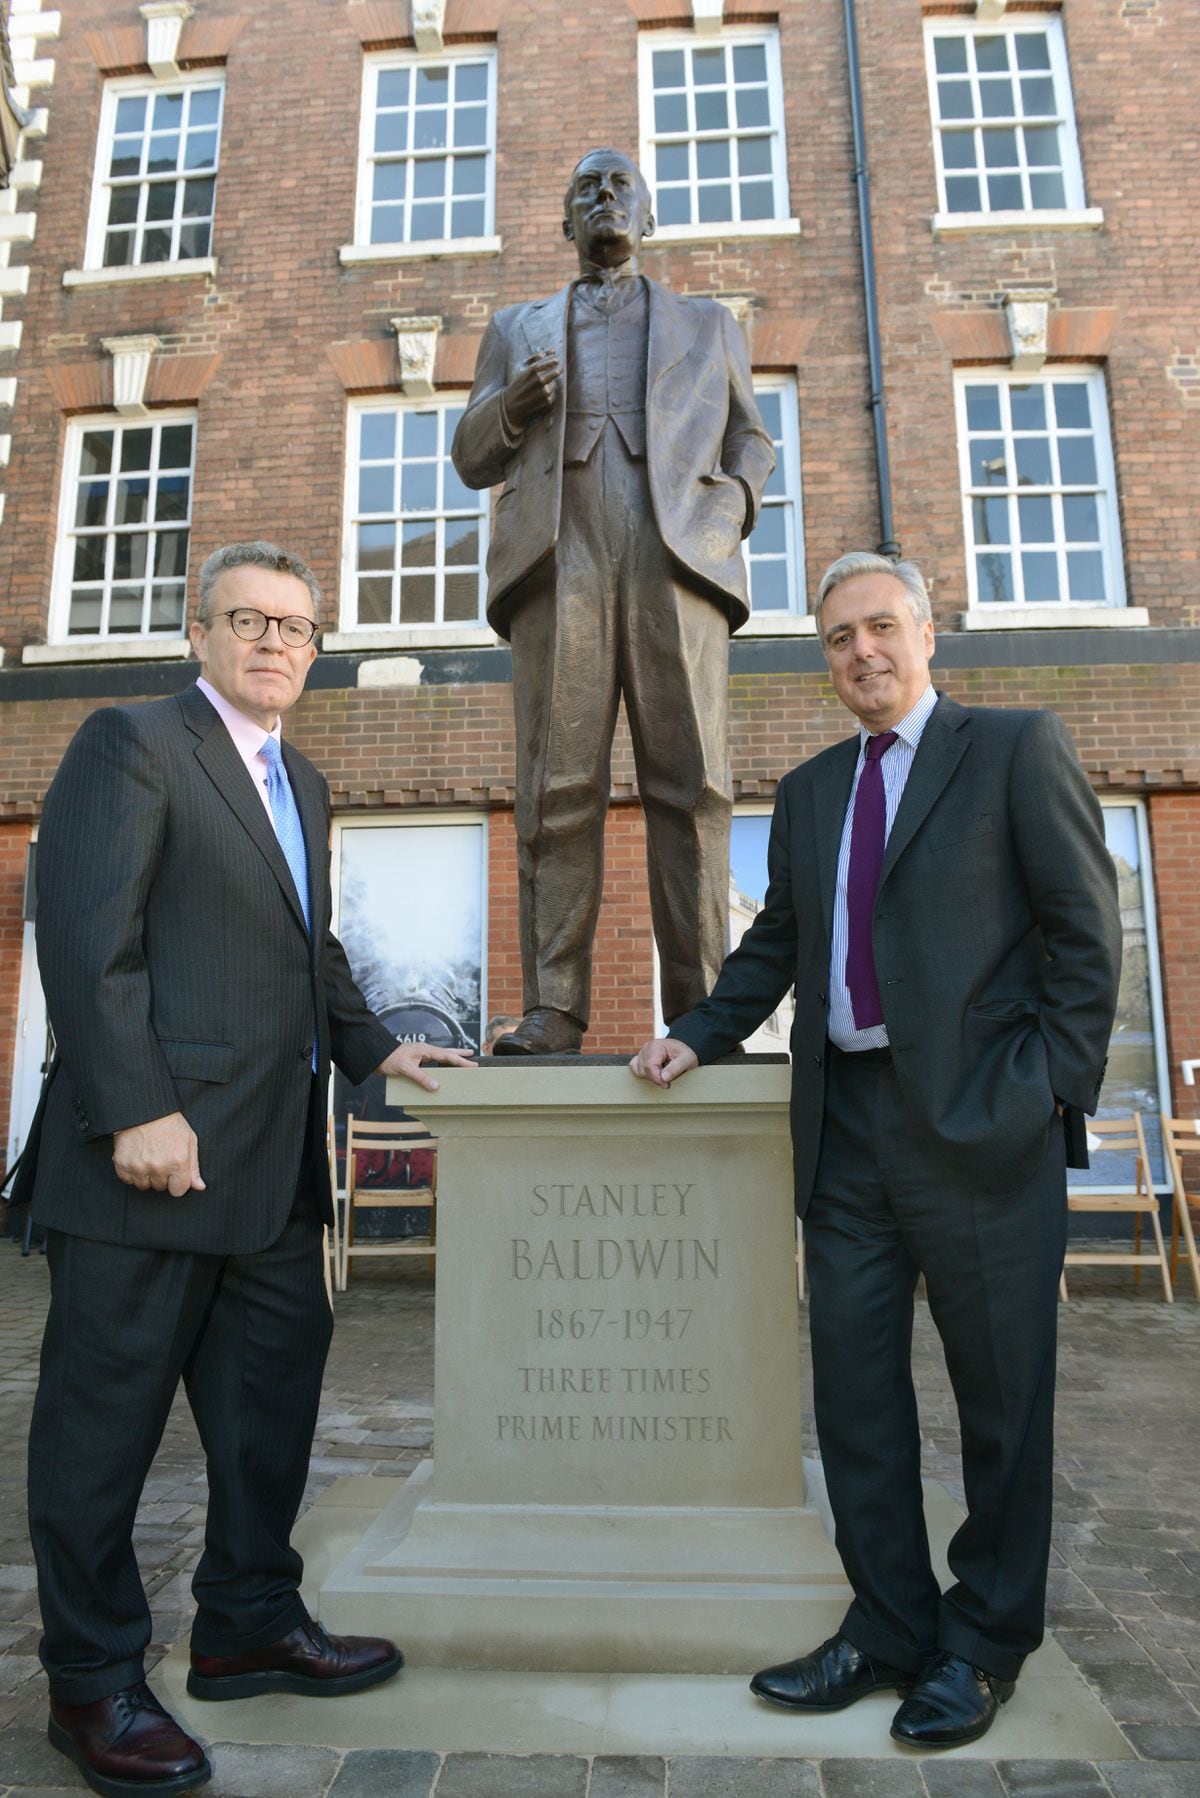 Wyre Forest MP Mark Garnier with, right, Deputy Leader of the Labour Party, Tom Watson, at the unveiling of the statue of former Prime Minister Stanley Baldwin